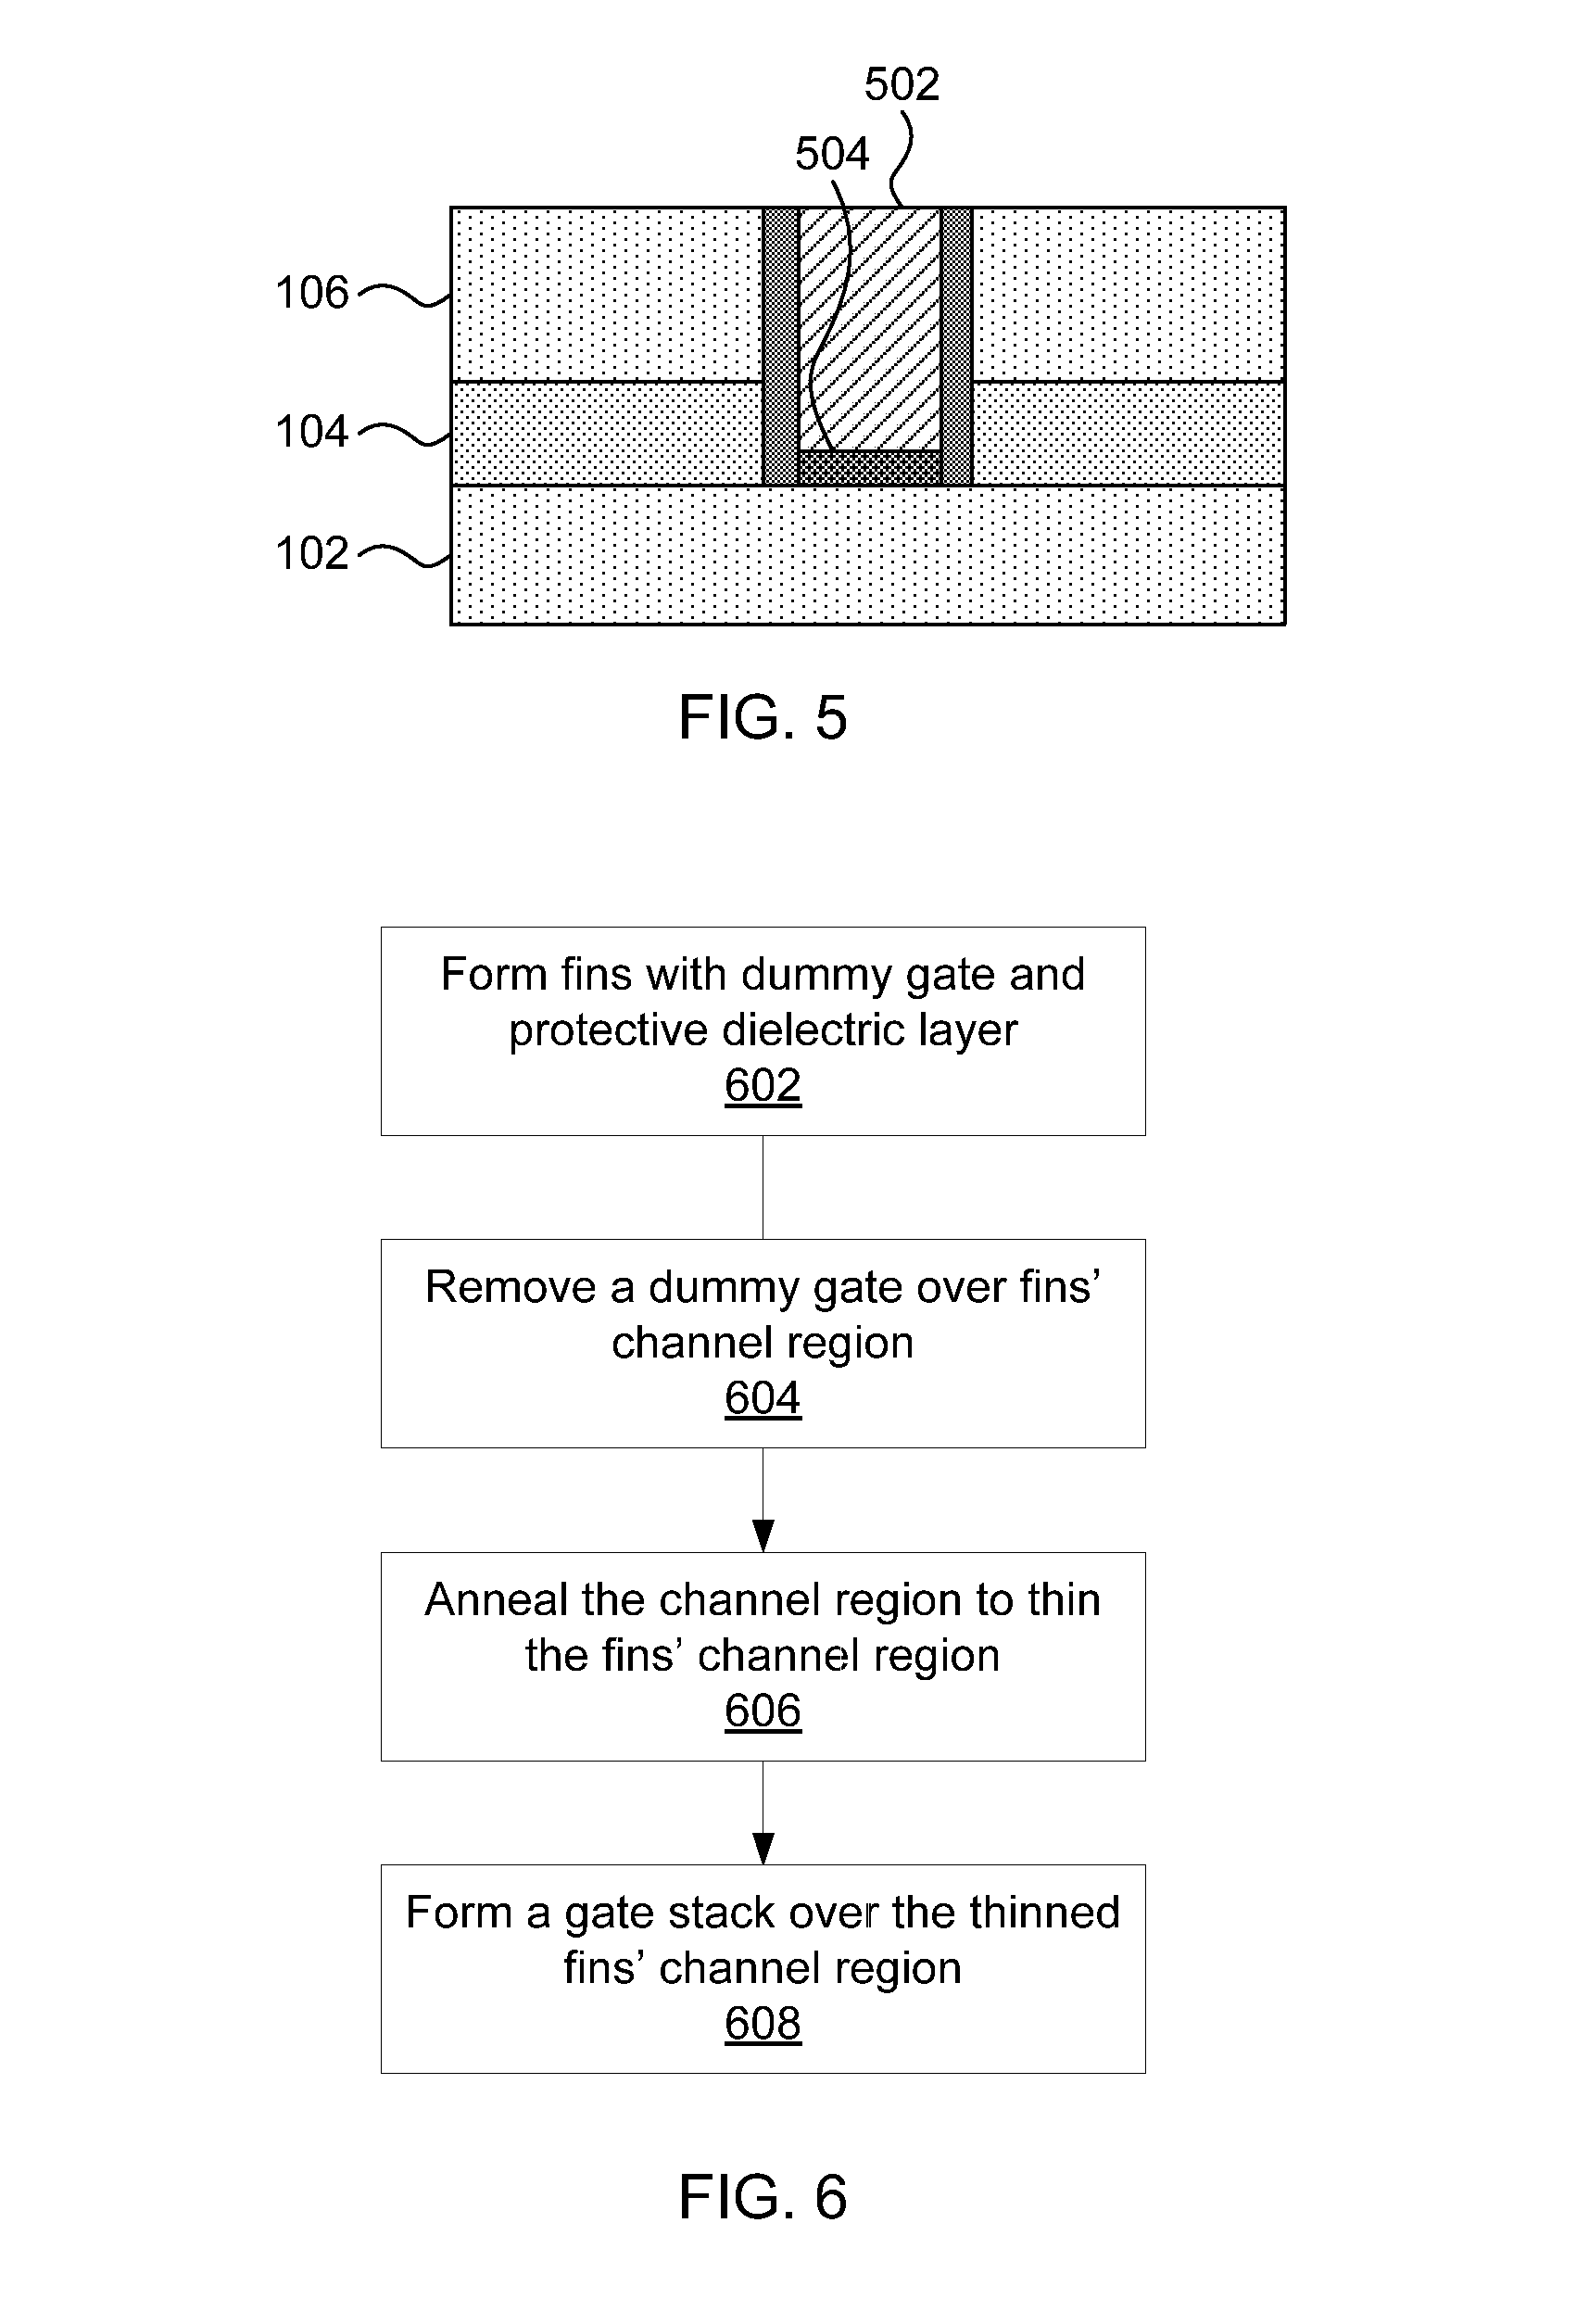 Localized fin width scaling using a hydrogen anneal